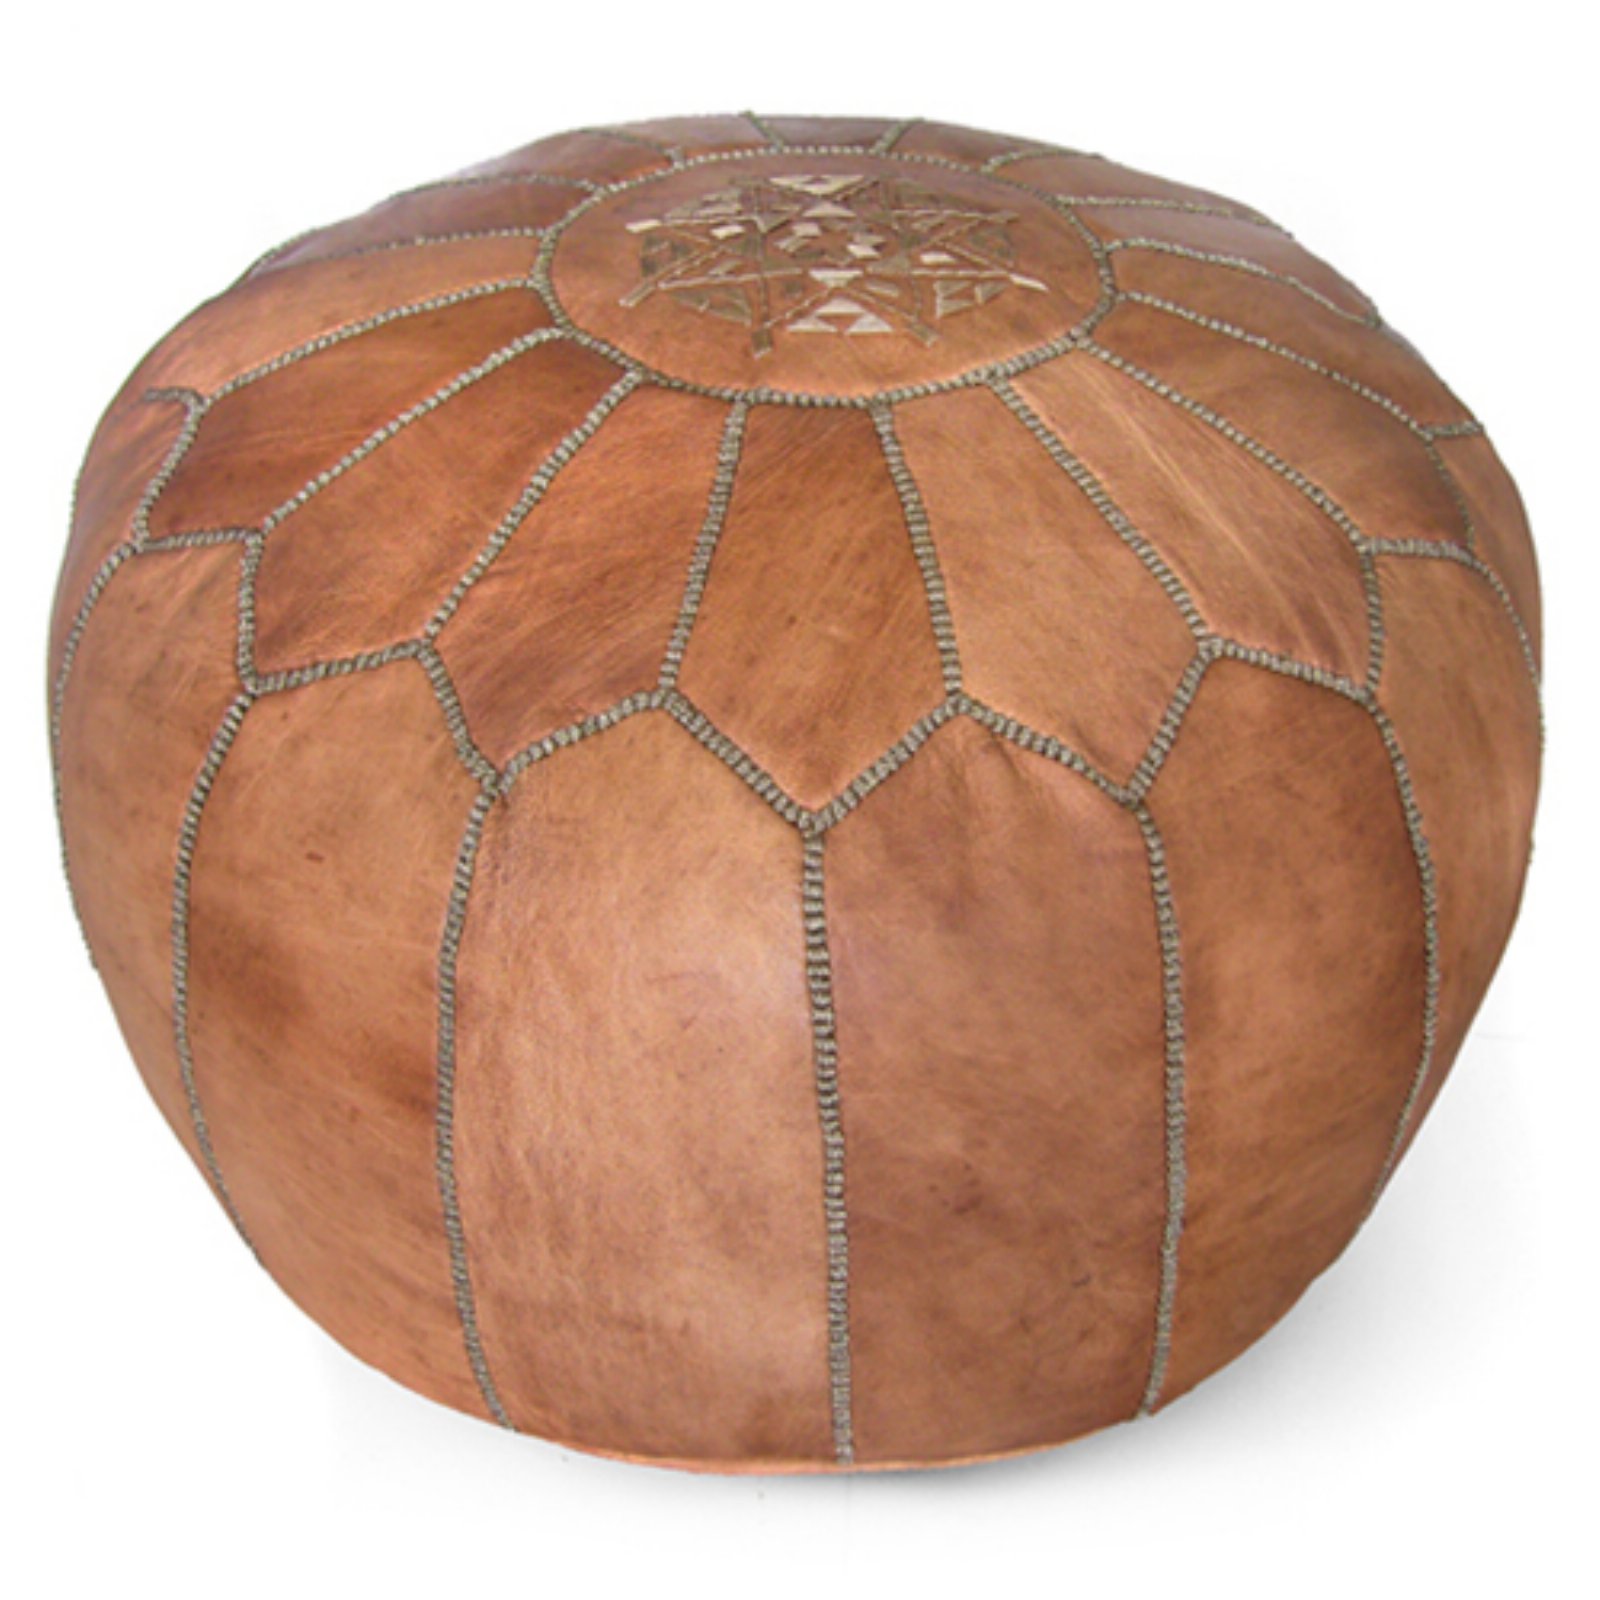 Ikram Design Round Moroccan Leather Pouf - image 1 of 4